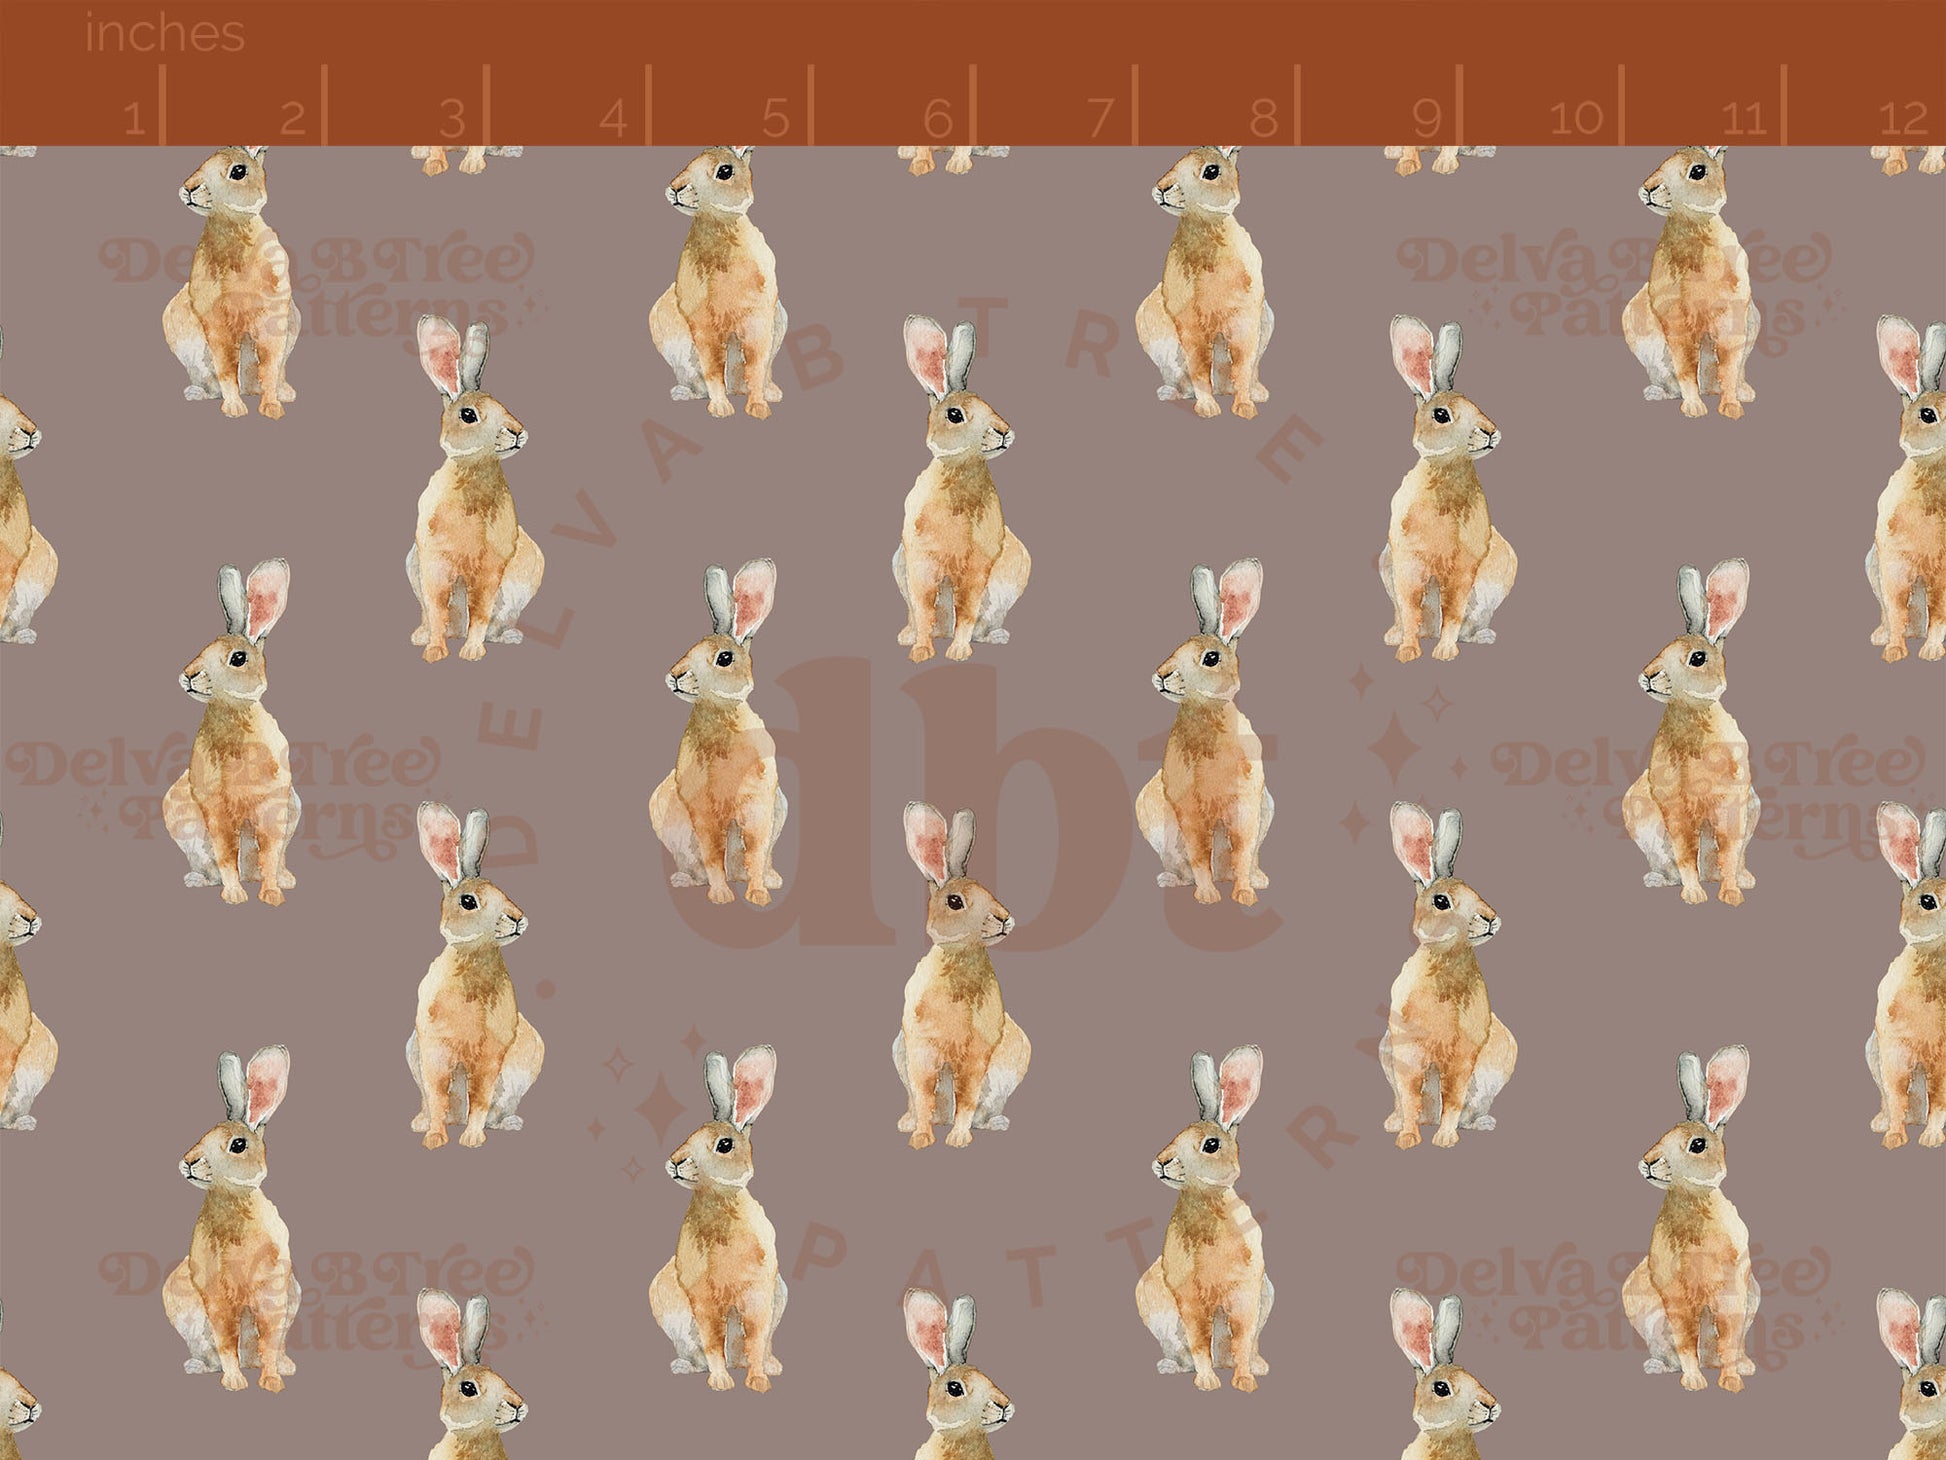 Watercolor bunnies on a taupe cinereous background seamless pattern scale digital file for small shops that make handmade products in small batches.